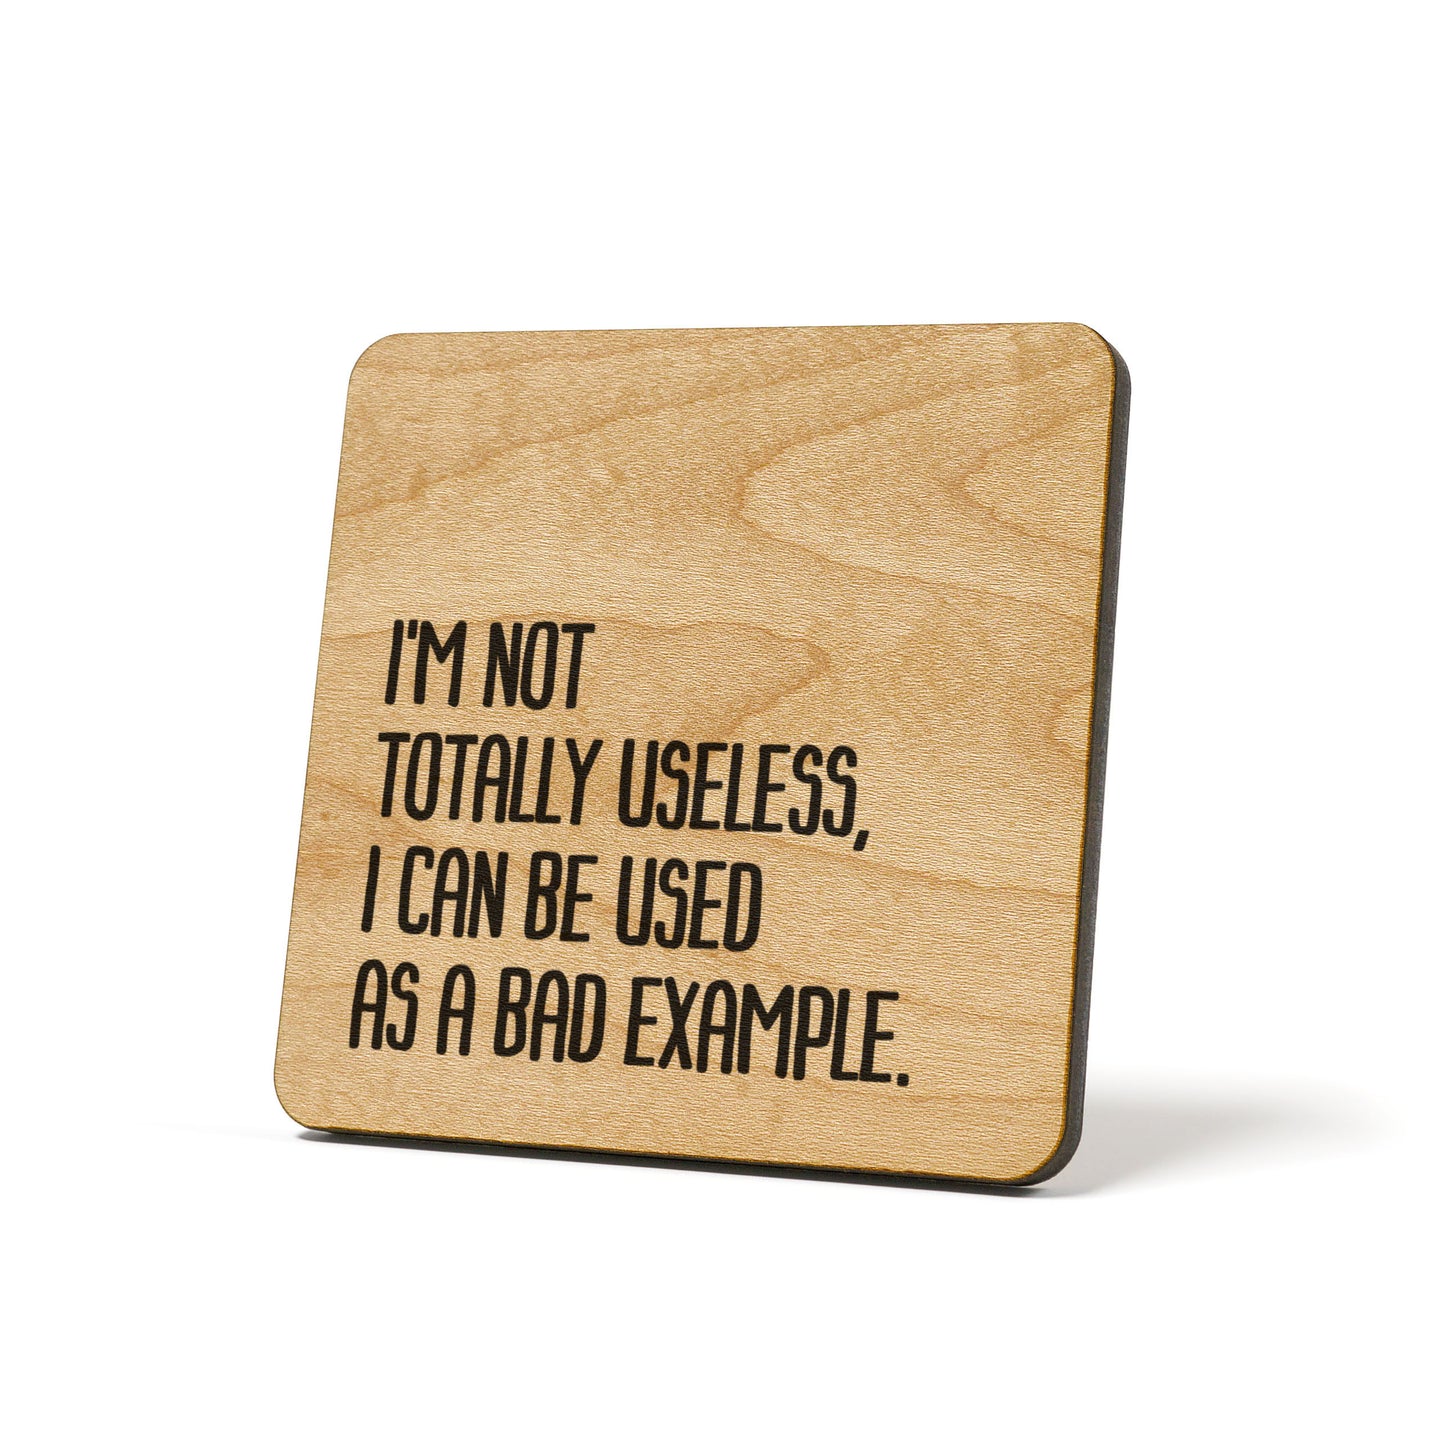 I'm not totally useless, I can be used as a bad example. Quote Coaster